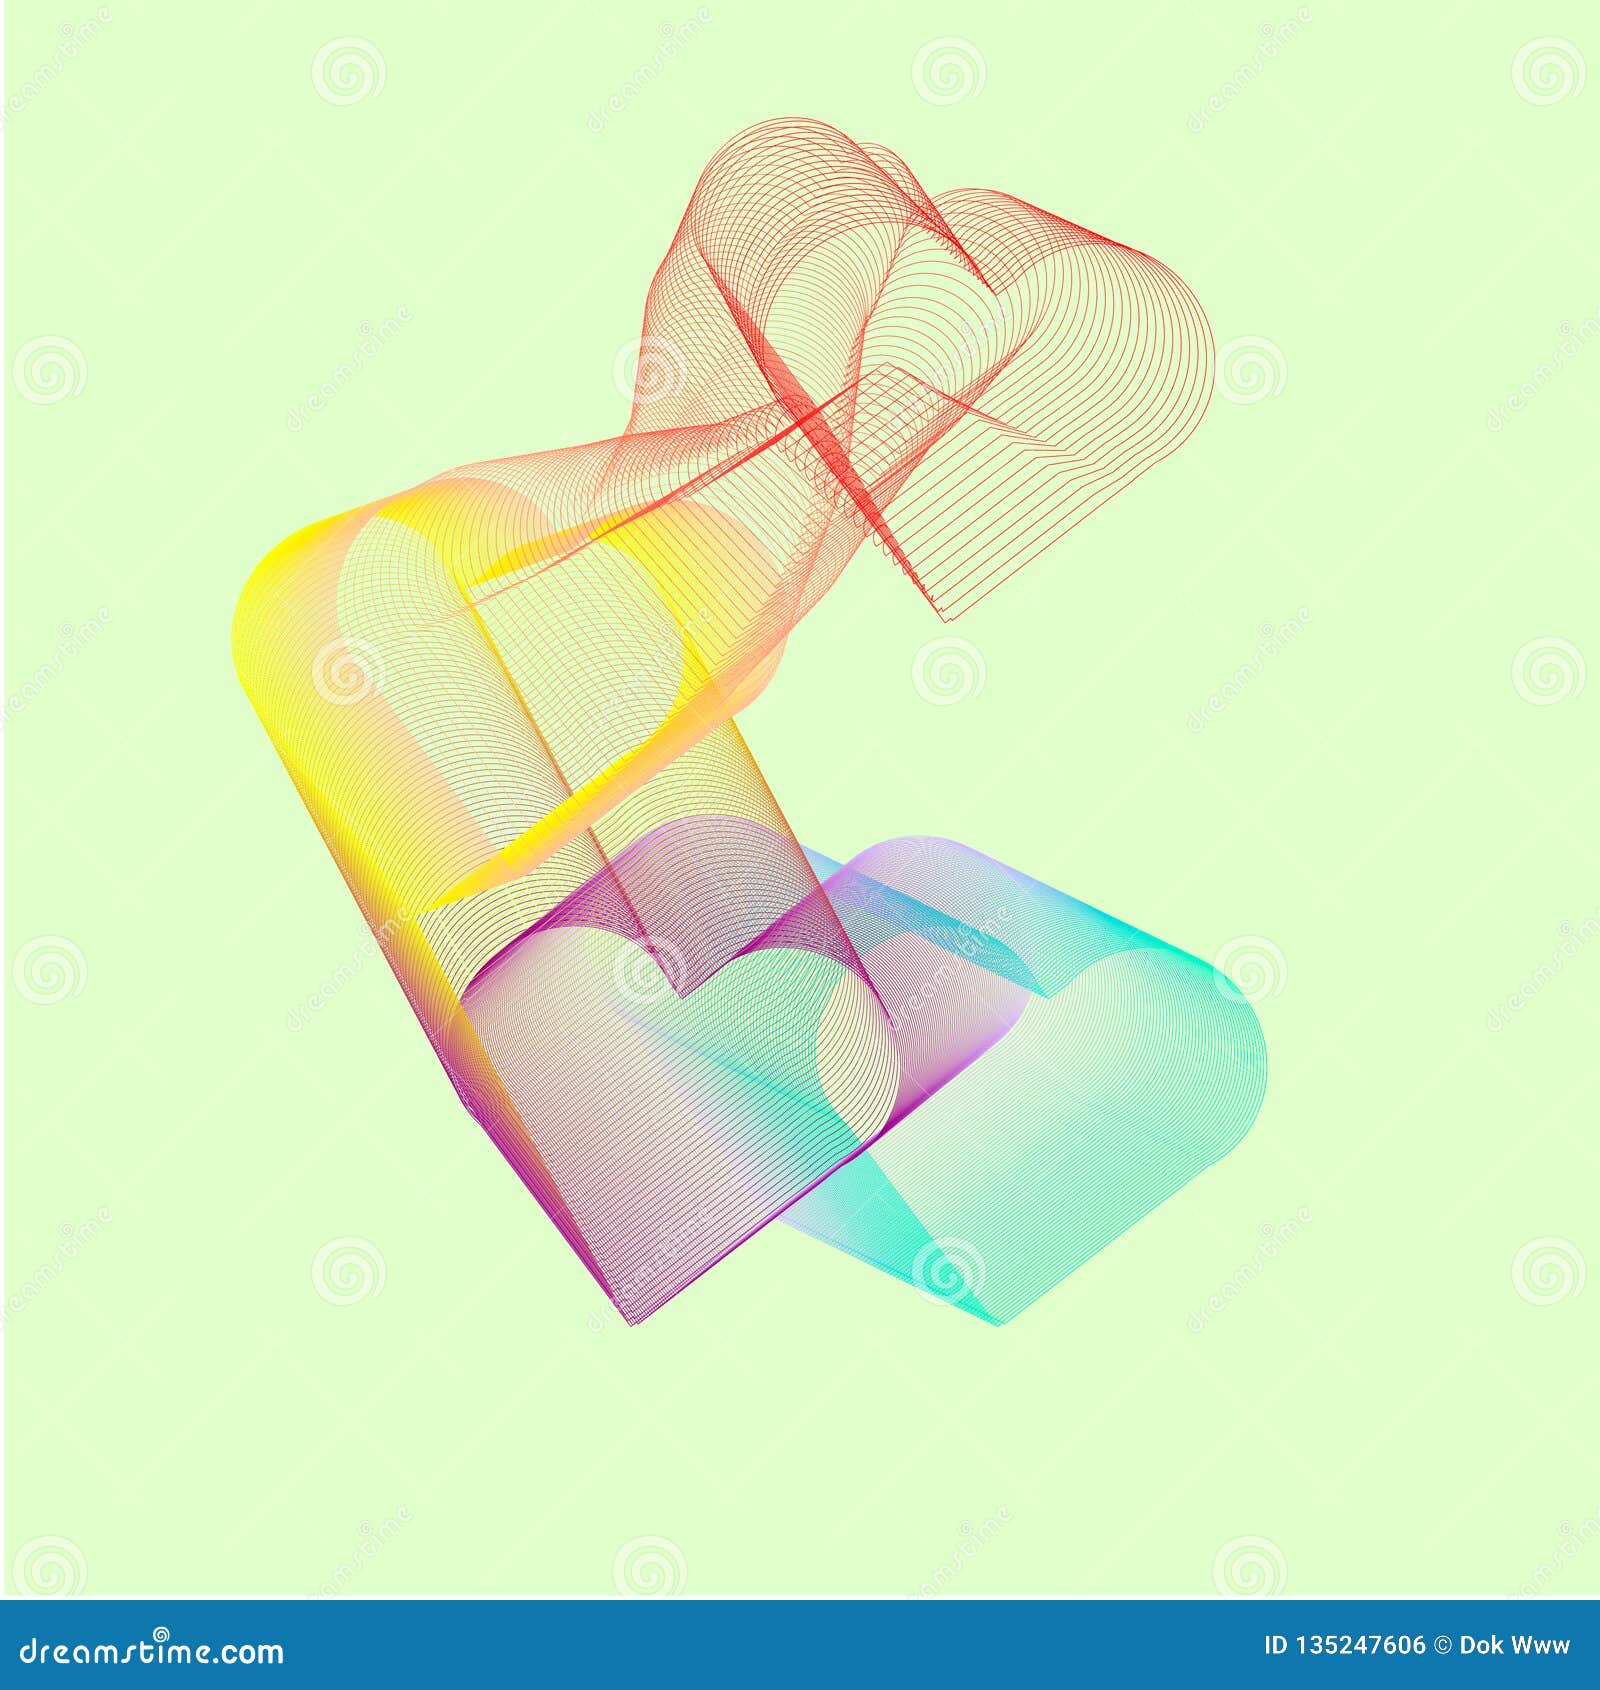 abstract colored hearts on a light background